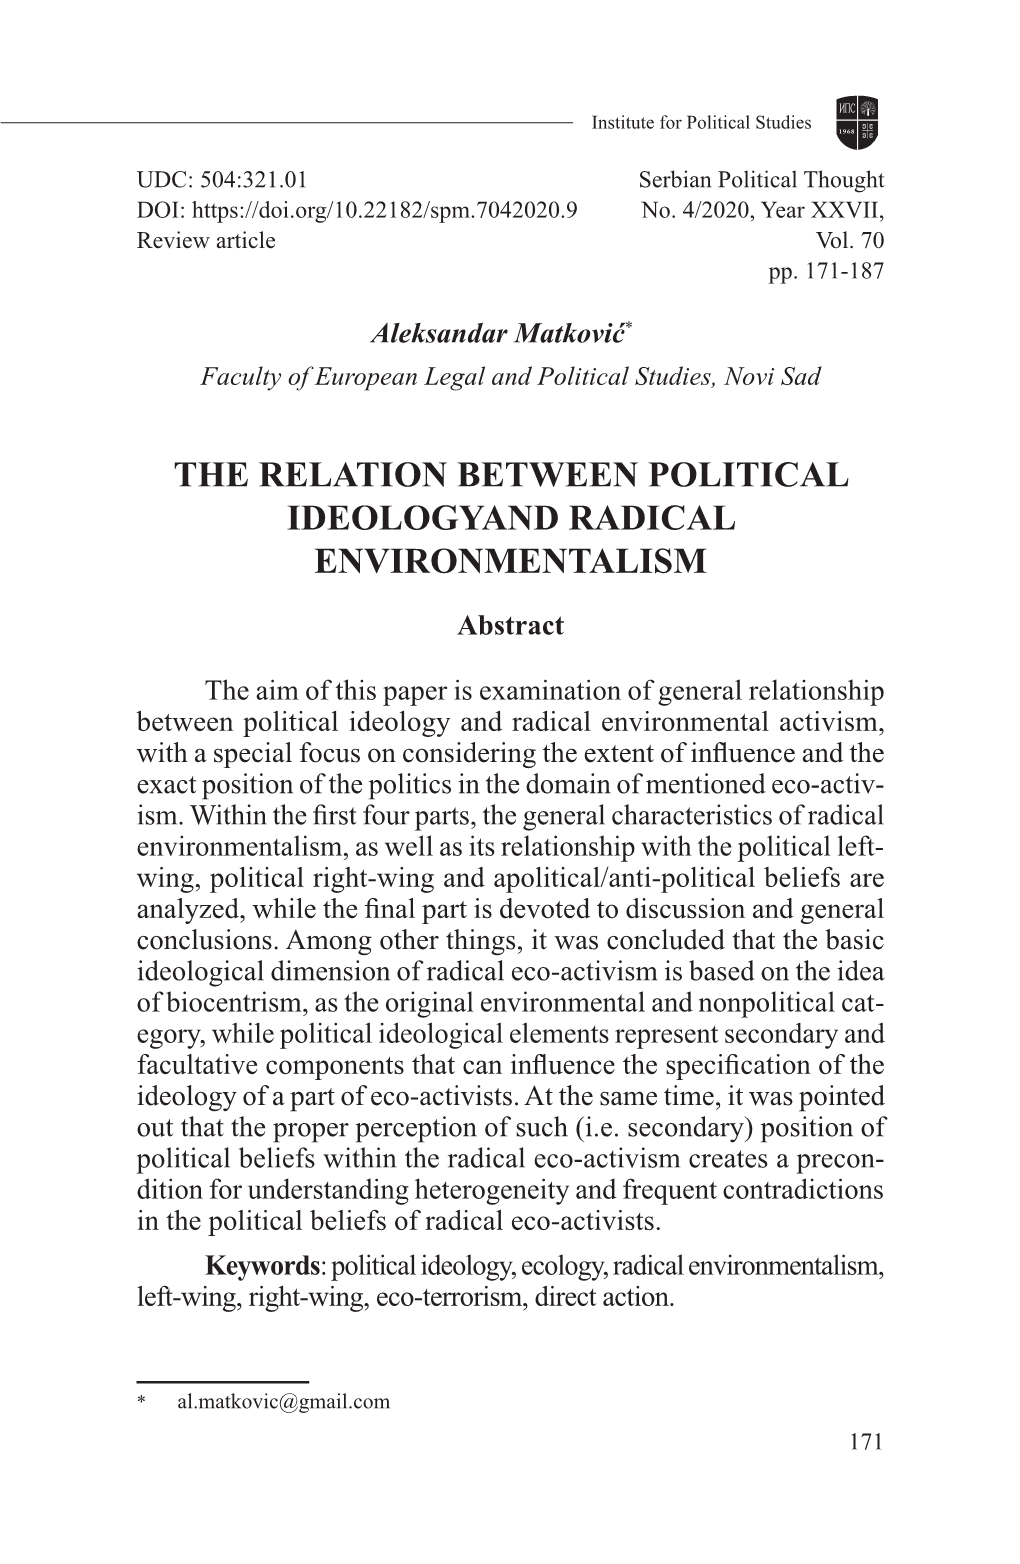 The Relation Between Political Ideologyand Radical Environmentalism